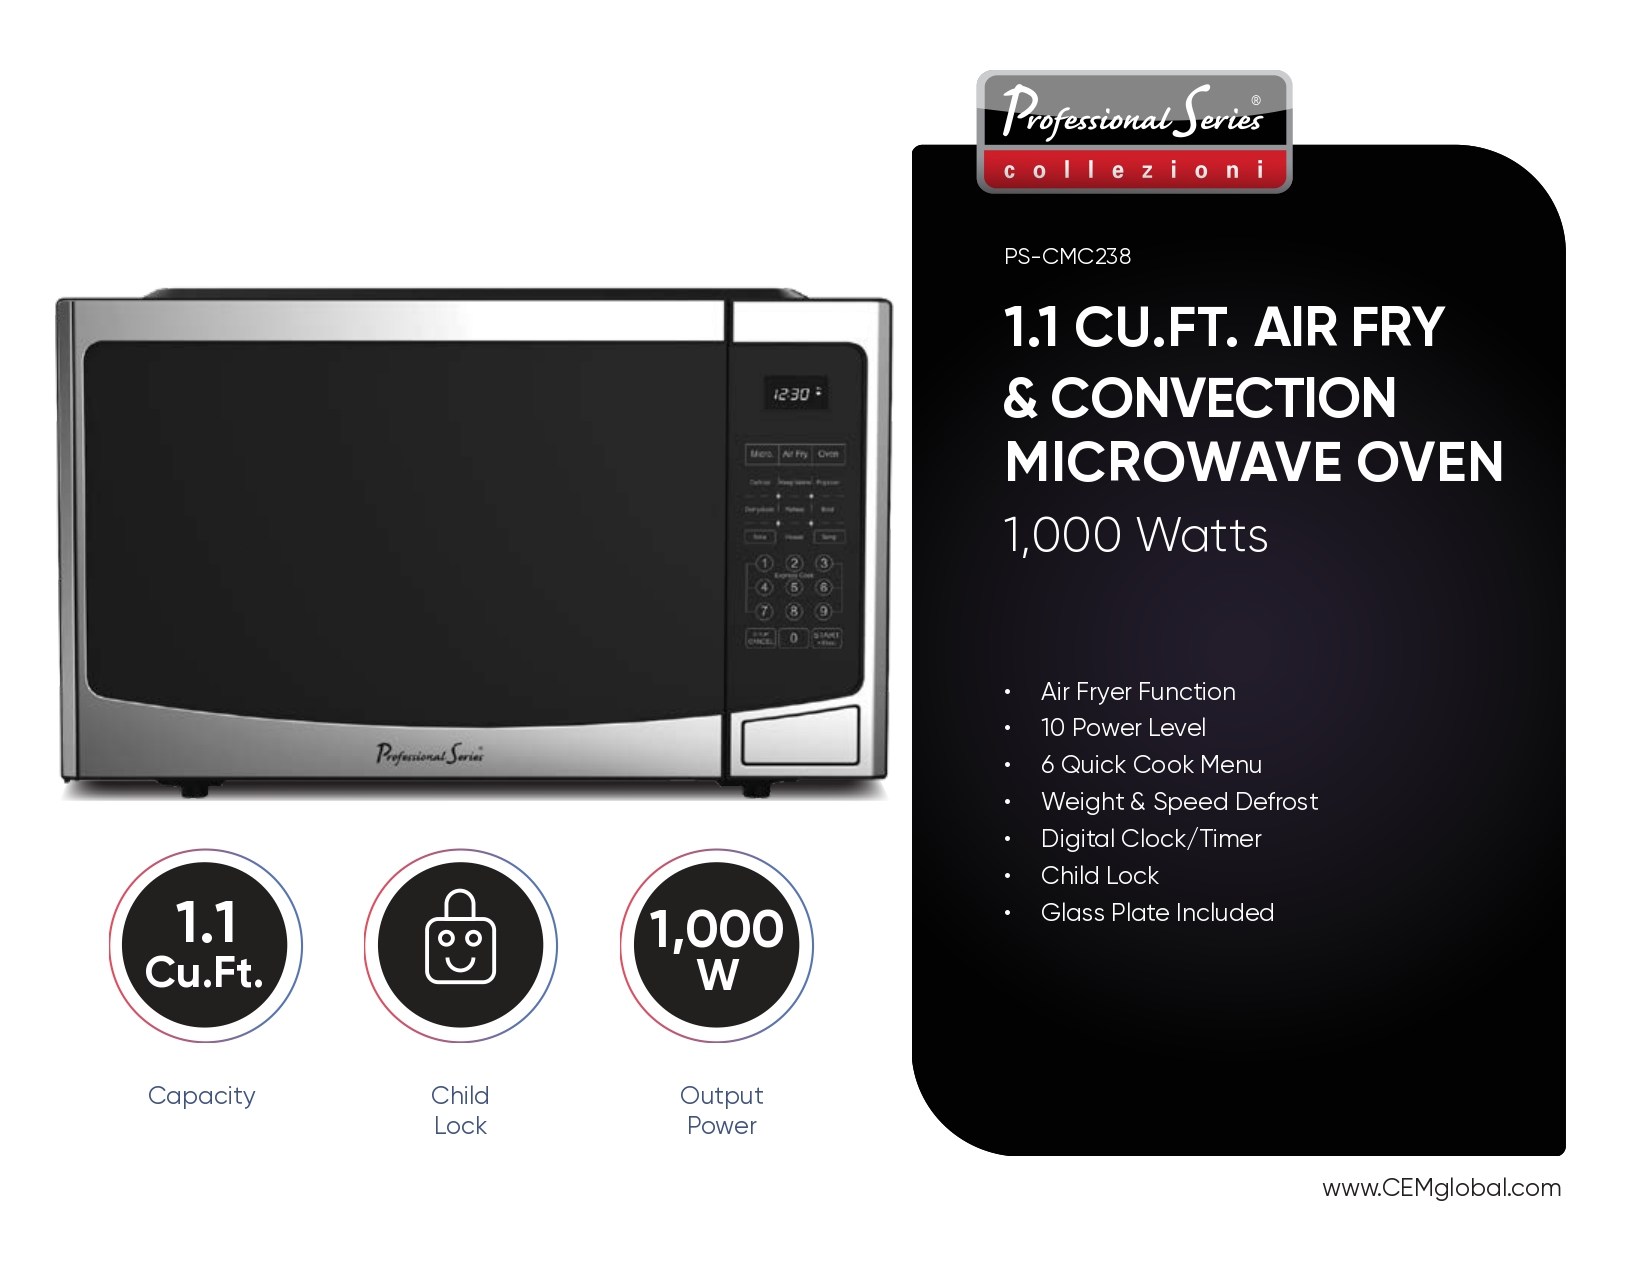 1.1 CU.FT. AIR FRY & CONVECTION MICROWAVE OVEN